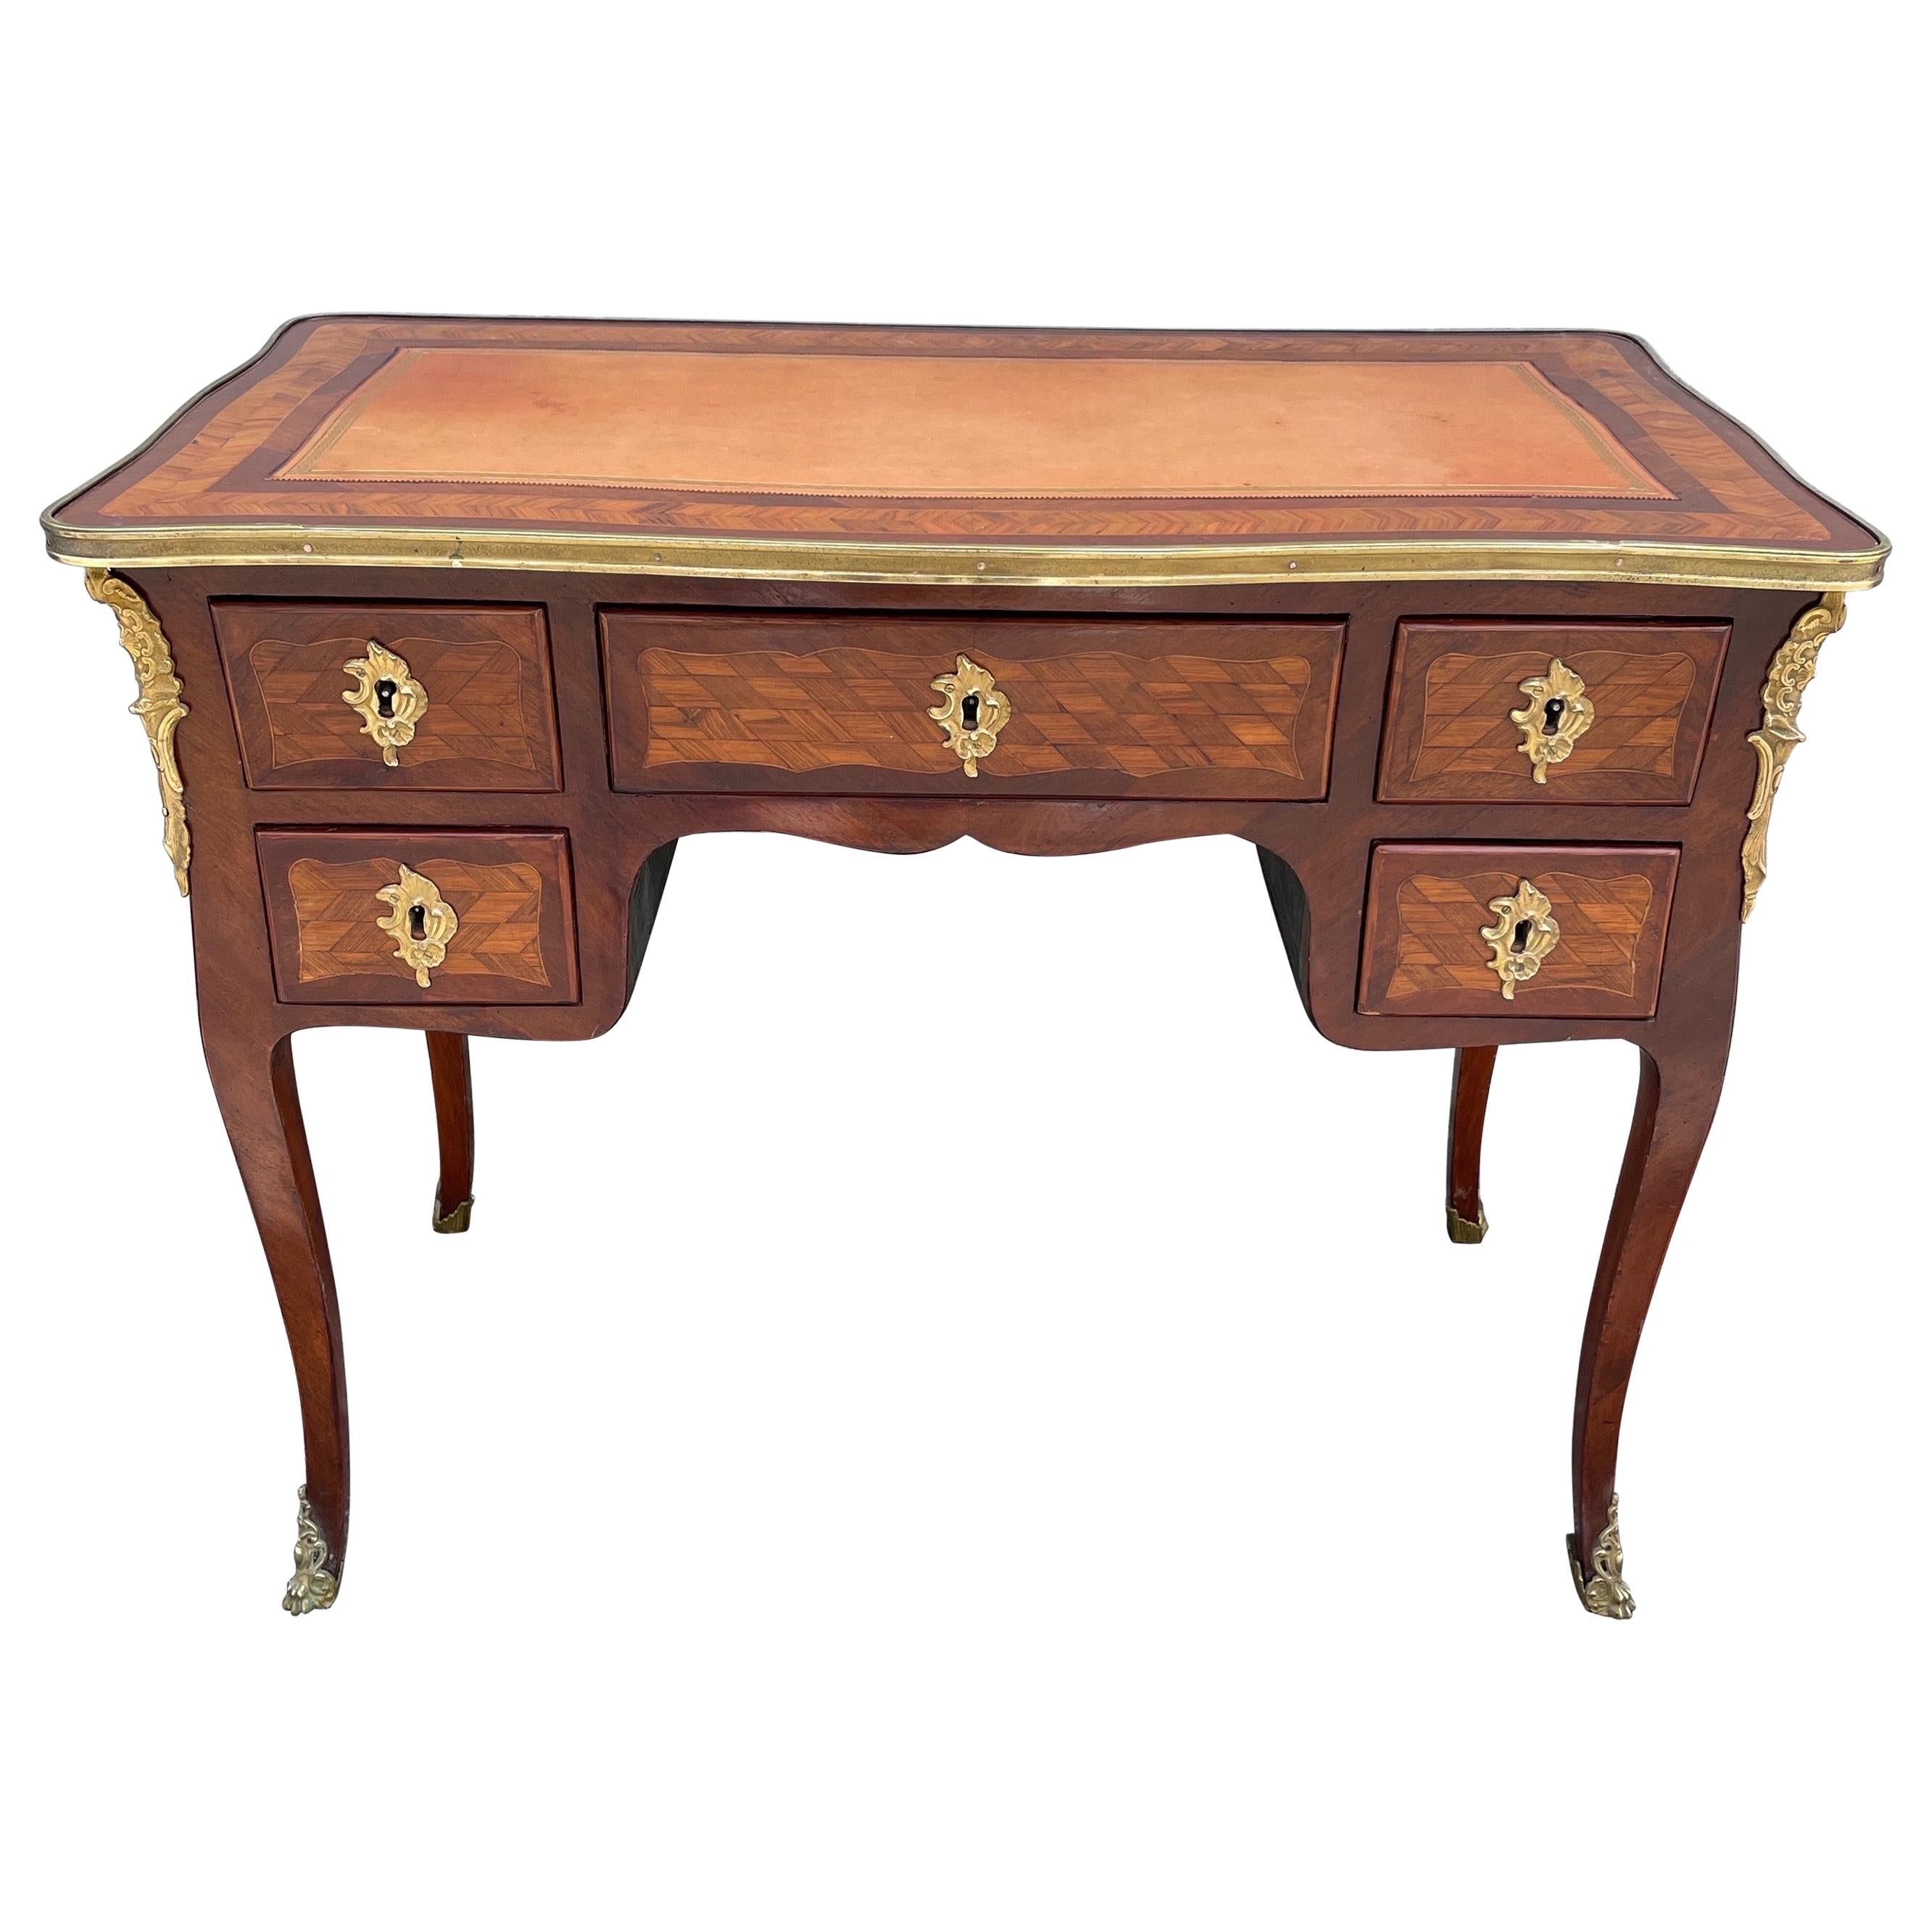 19th Century Louis XV Style Ladies French Marquetry Desk